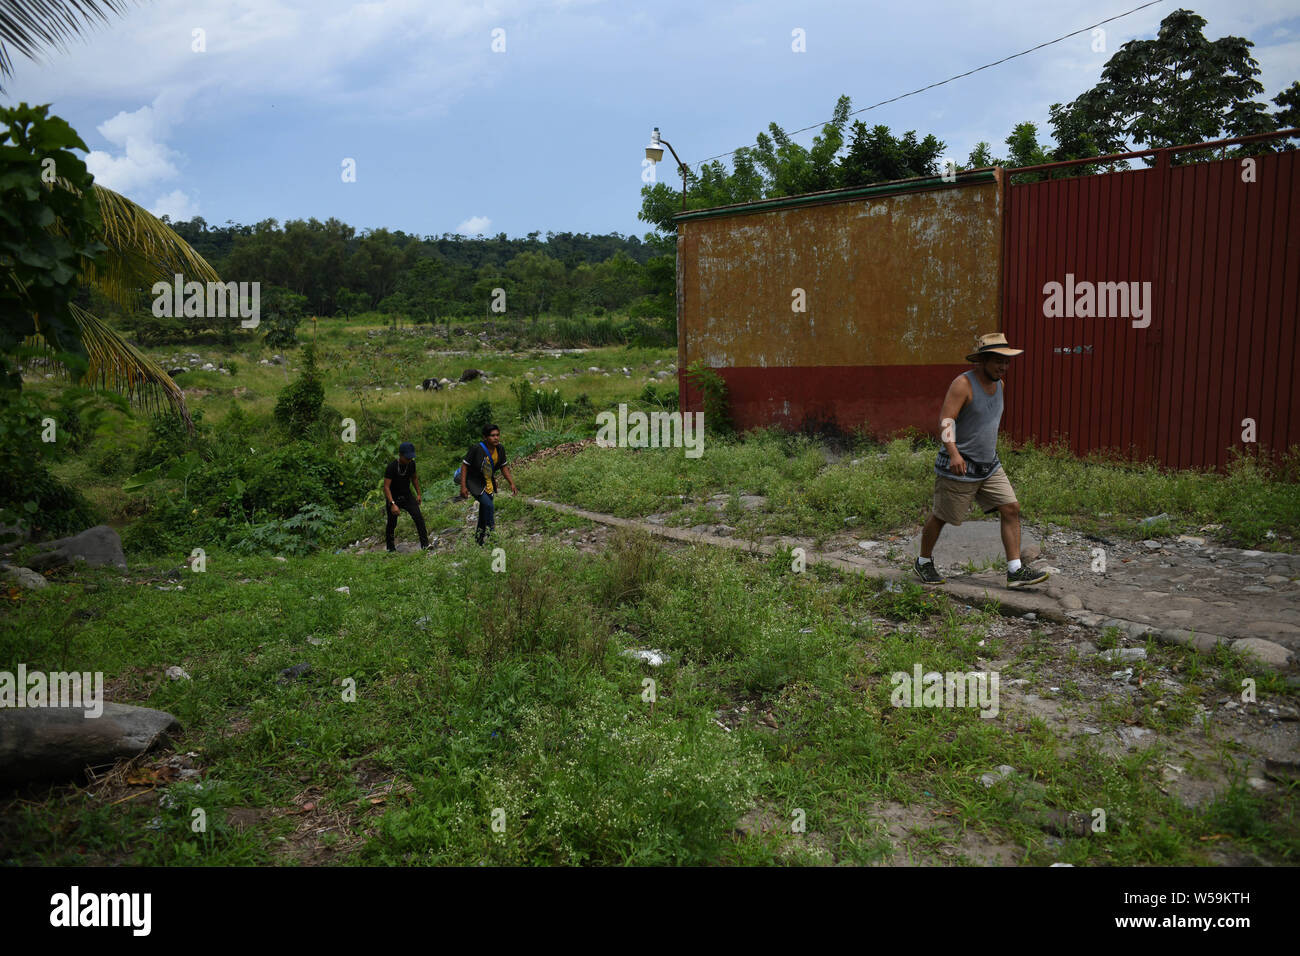 July 25, 2019, Talisman, Chiapas, Mexico: A Guatemalan ''pollero'' (smuggler) leads openly two of his clients into Mexican territory from el Limon village into Talisman on Thursday, even as Guatemala signed a treaty with the US designating it a 'safe'' country for migrants. Credit: Miguel Juarez Lugo/ZUMA Wire/Alamy Live News Stock Photo